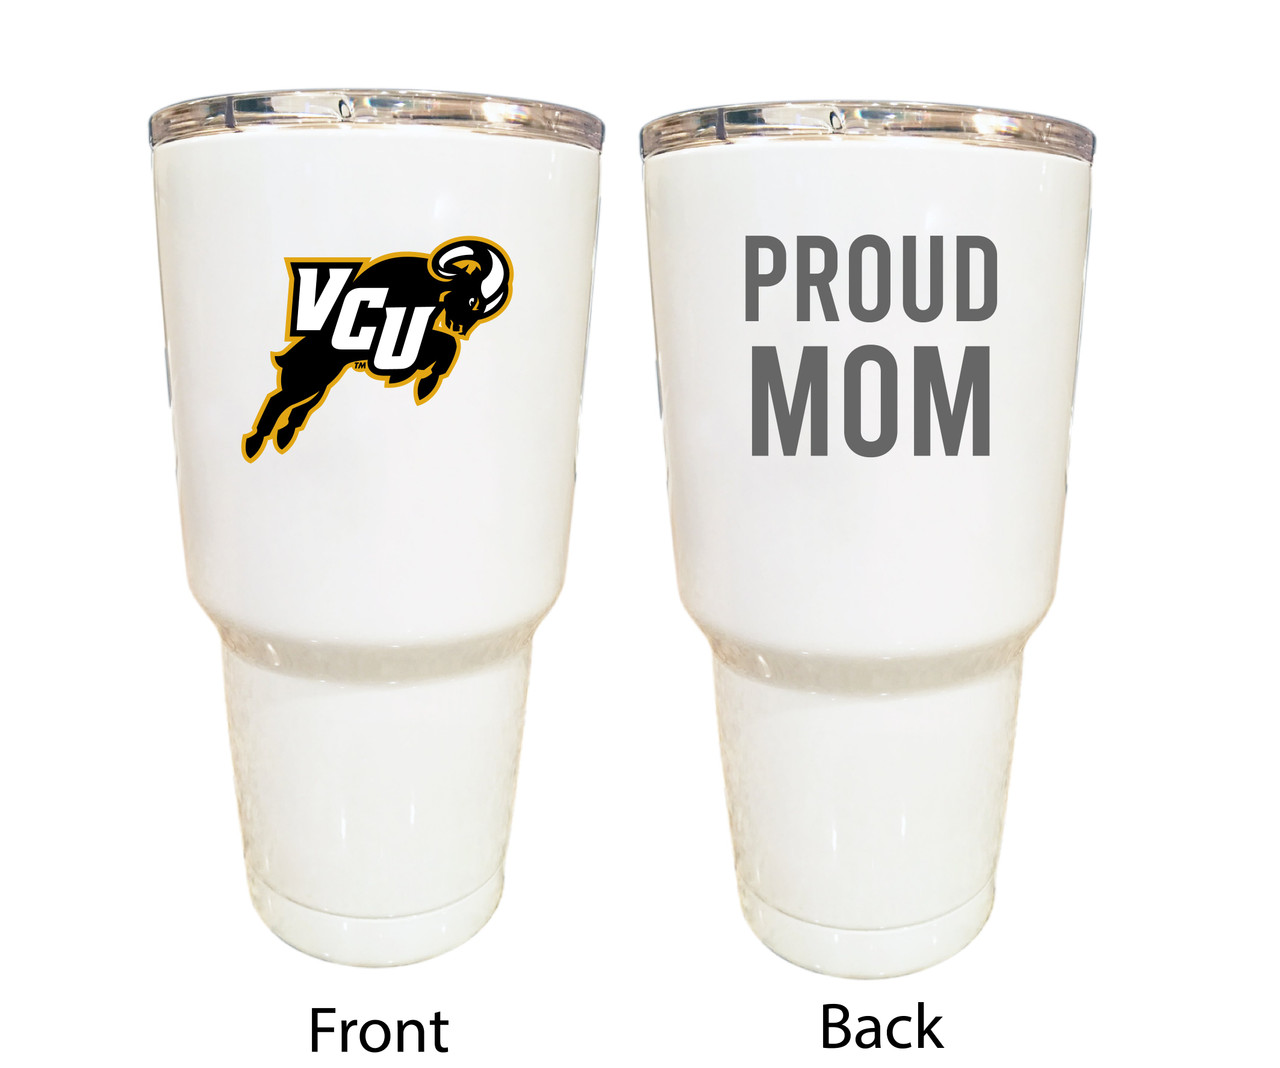 Virginia Commonwealth Proud Mom 24 oz Insulated Stainless Steel Tumblers Choose Your Color.